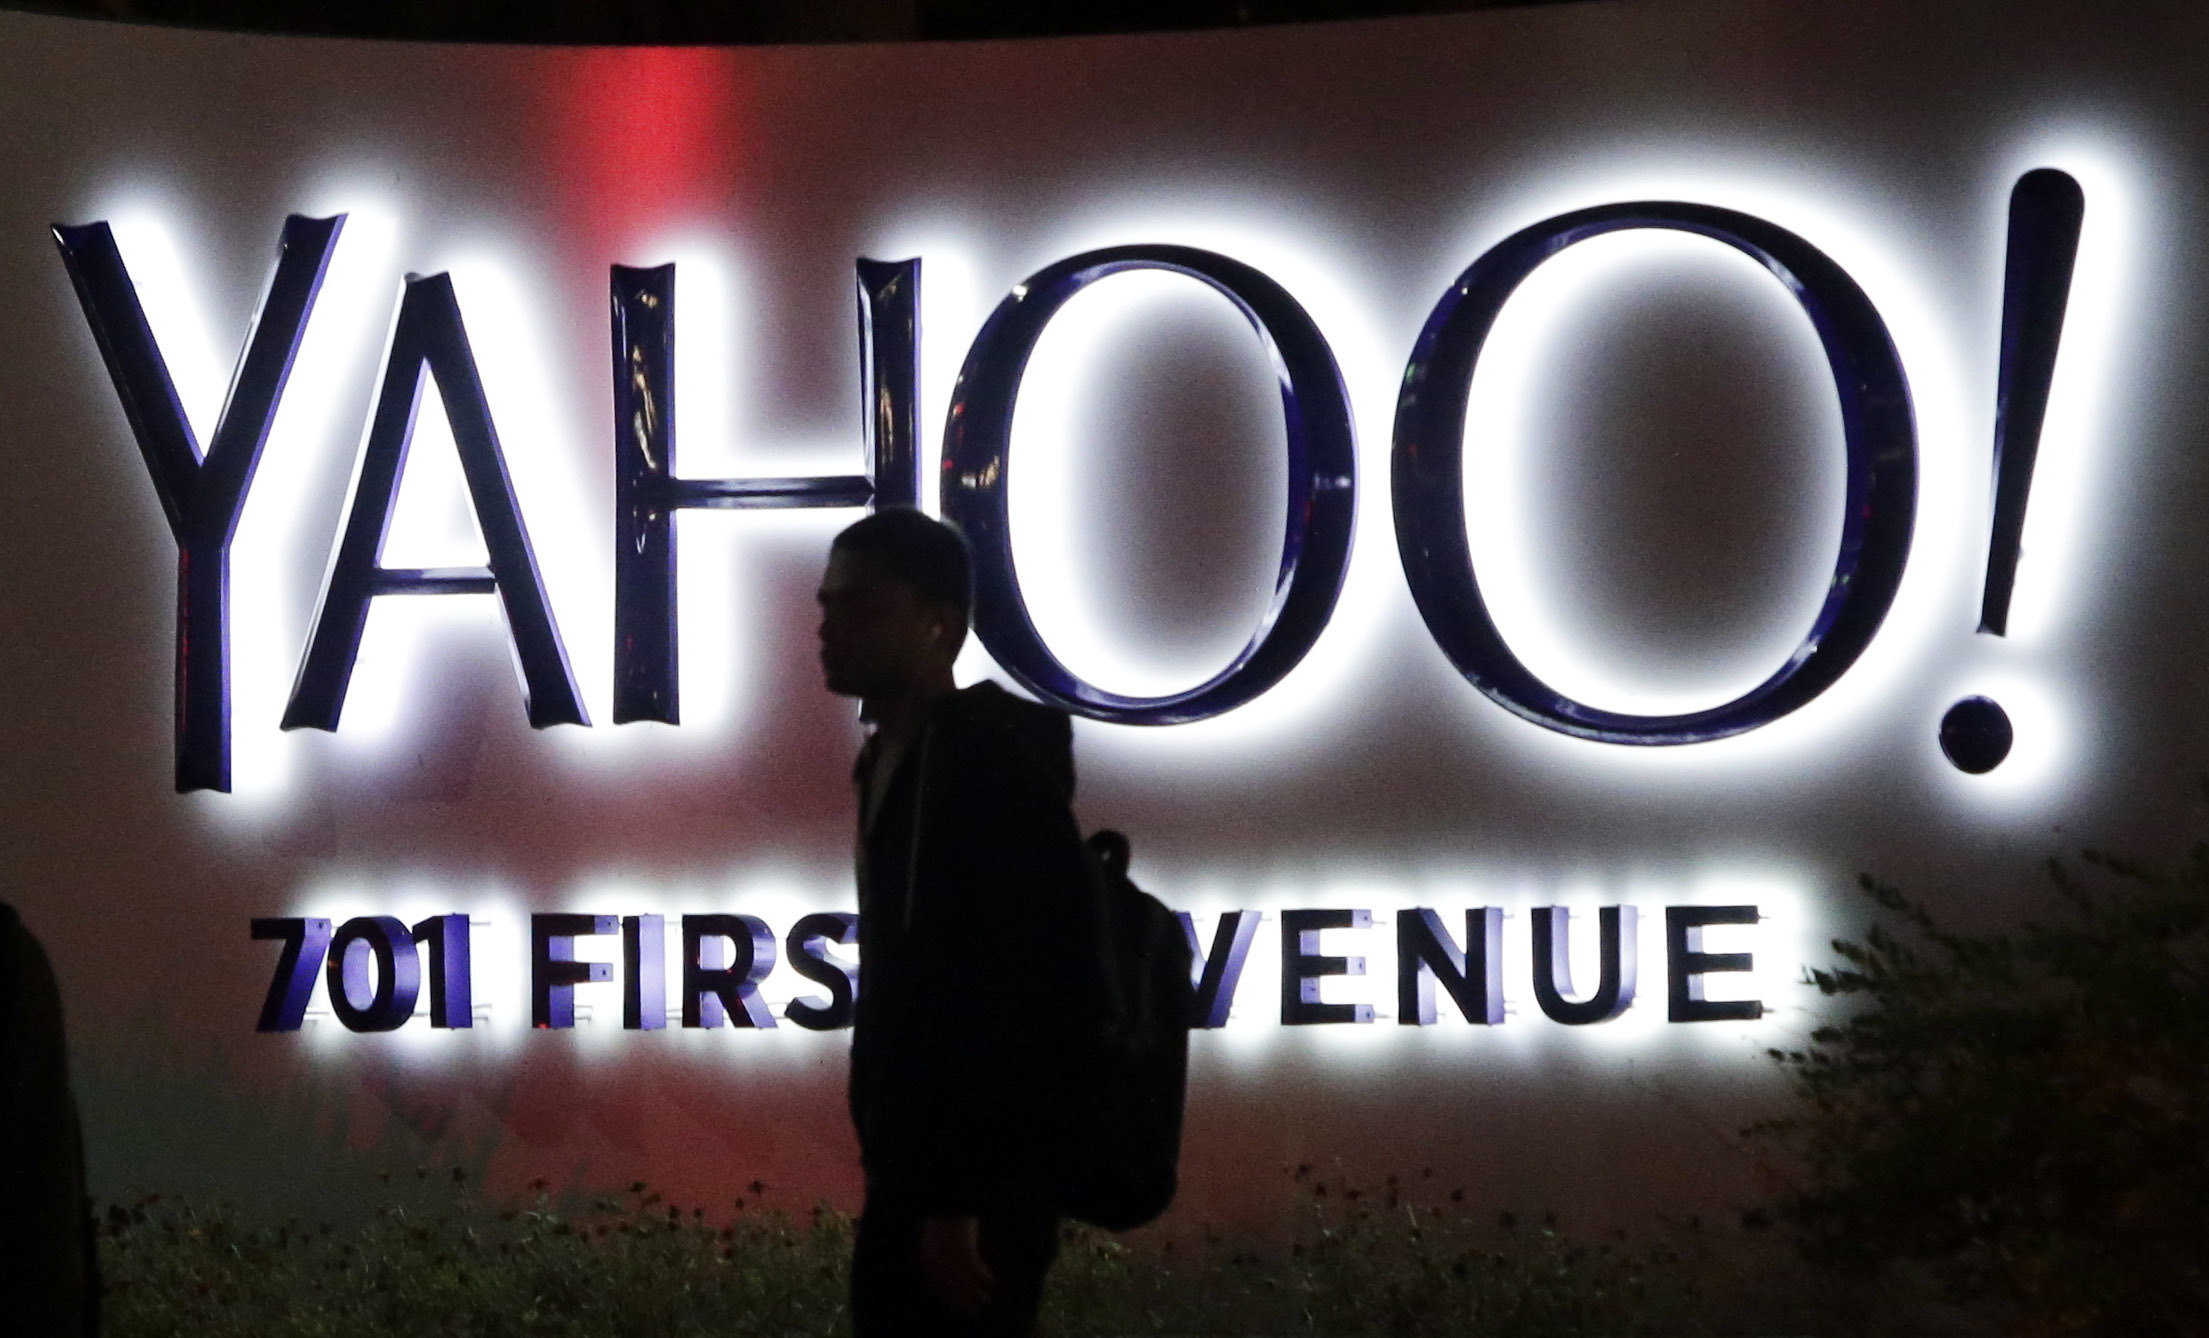 U.S. to Plan Indictments Related to Yahoo Hacking, Source Says